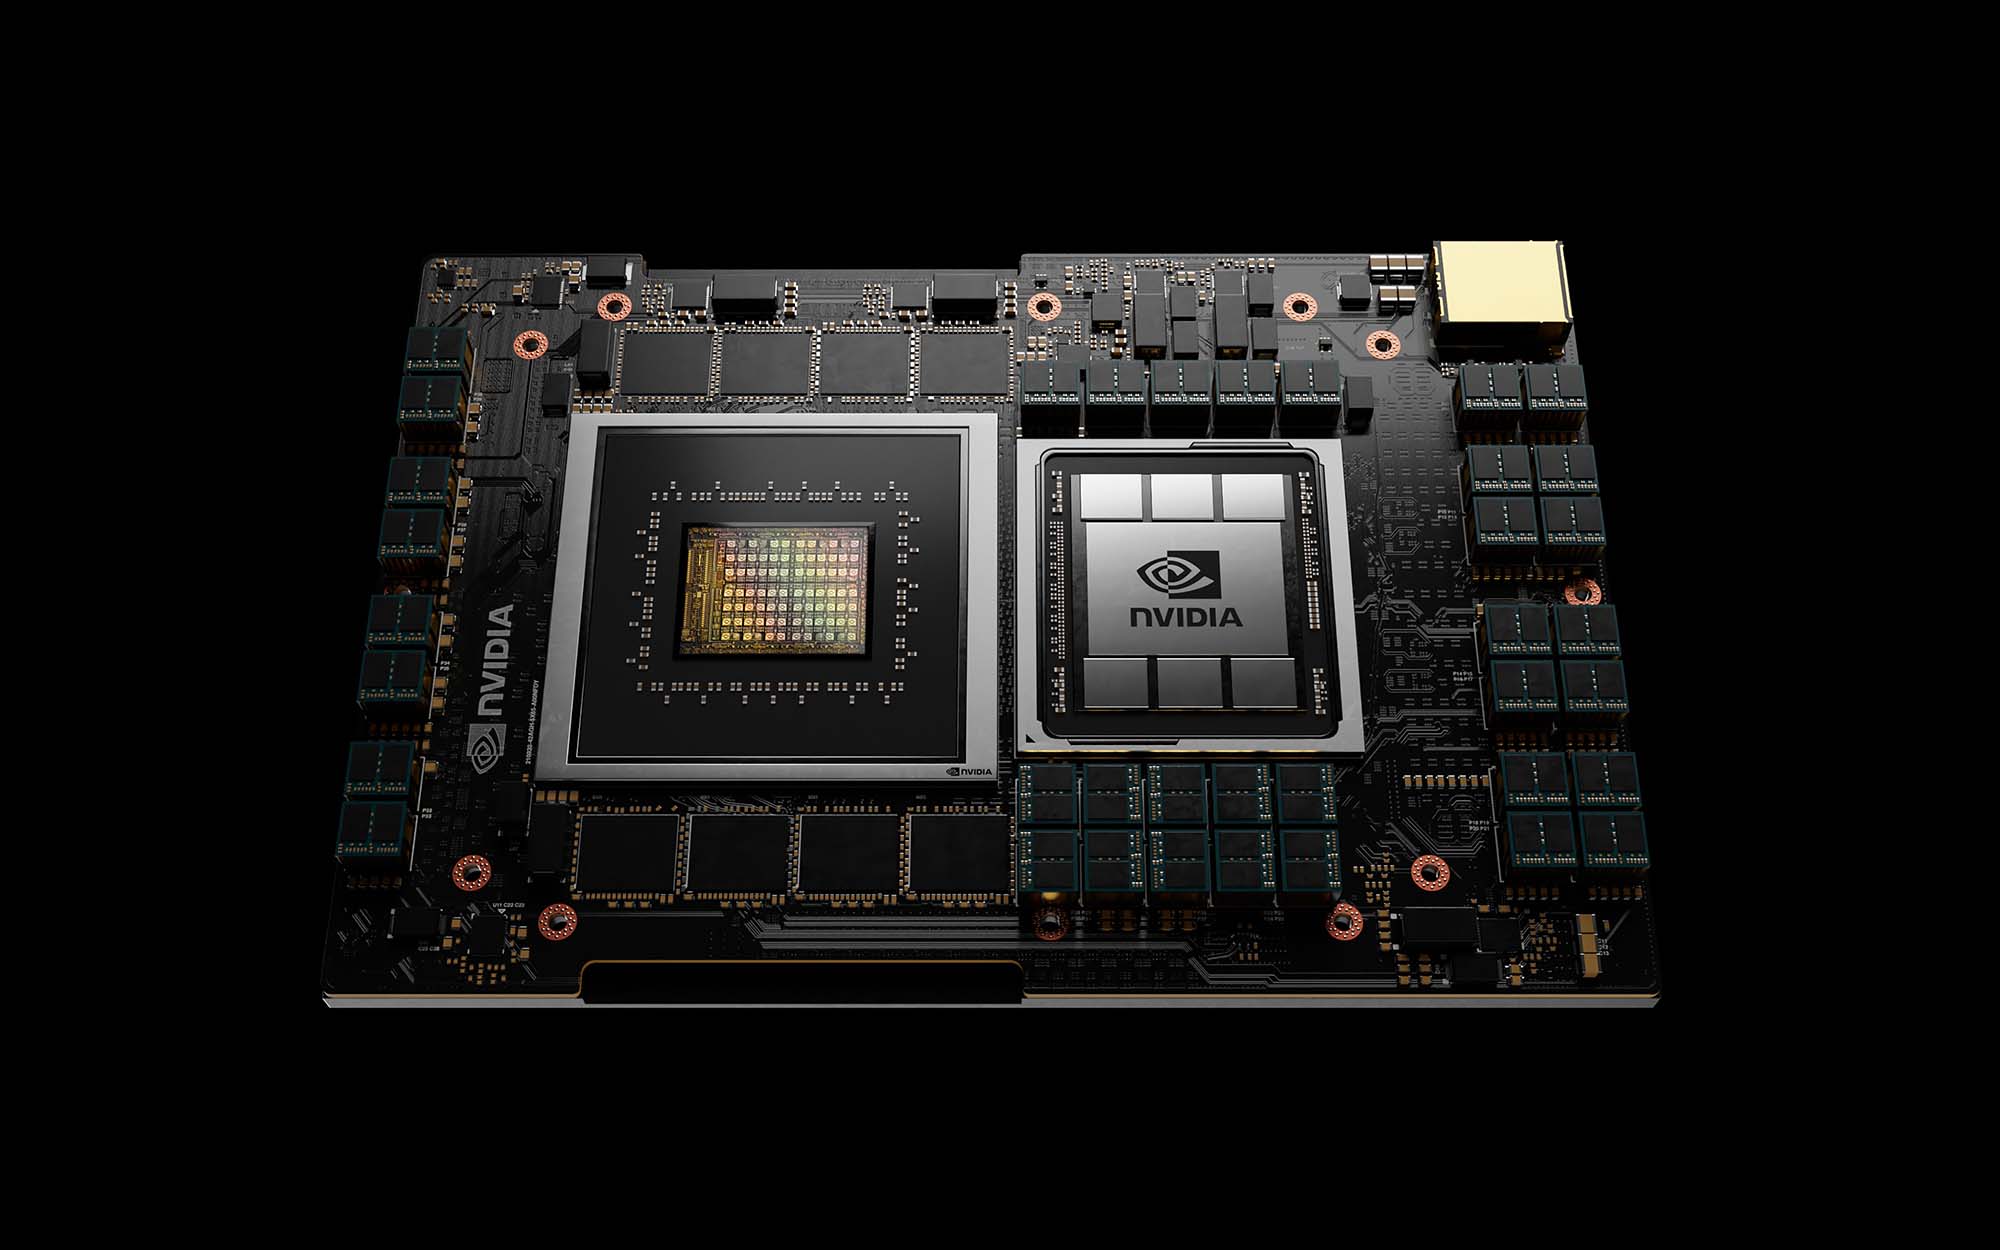 nvidia’s-arm-powered-grace-cpu-debuts,-claims-10x-more-performance-than-x86-servers